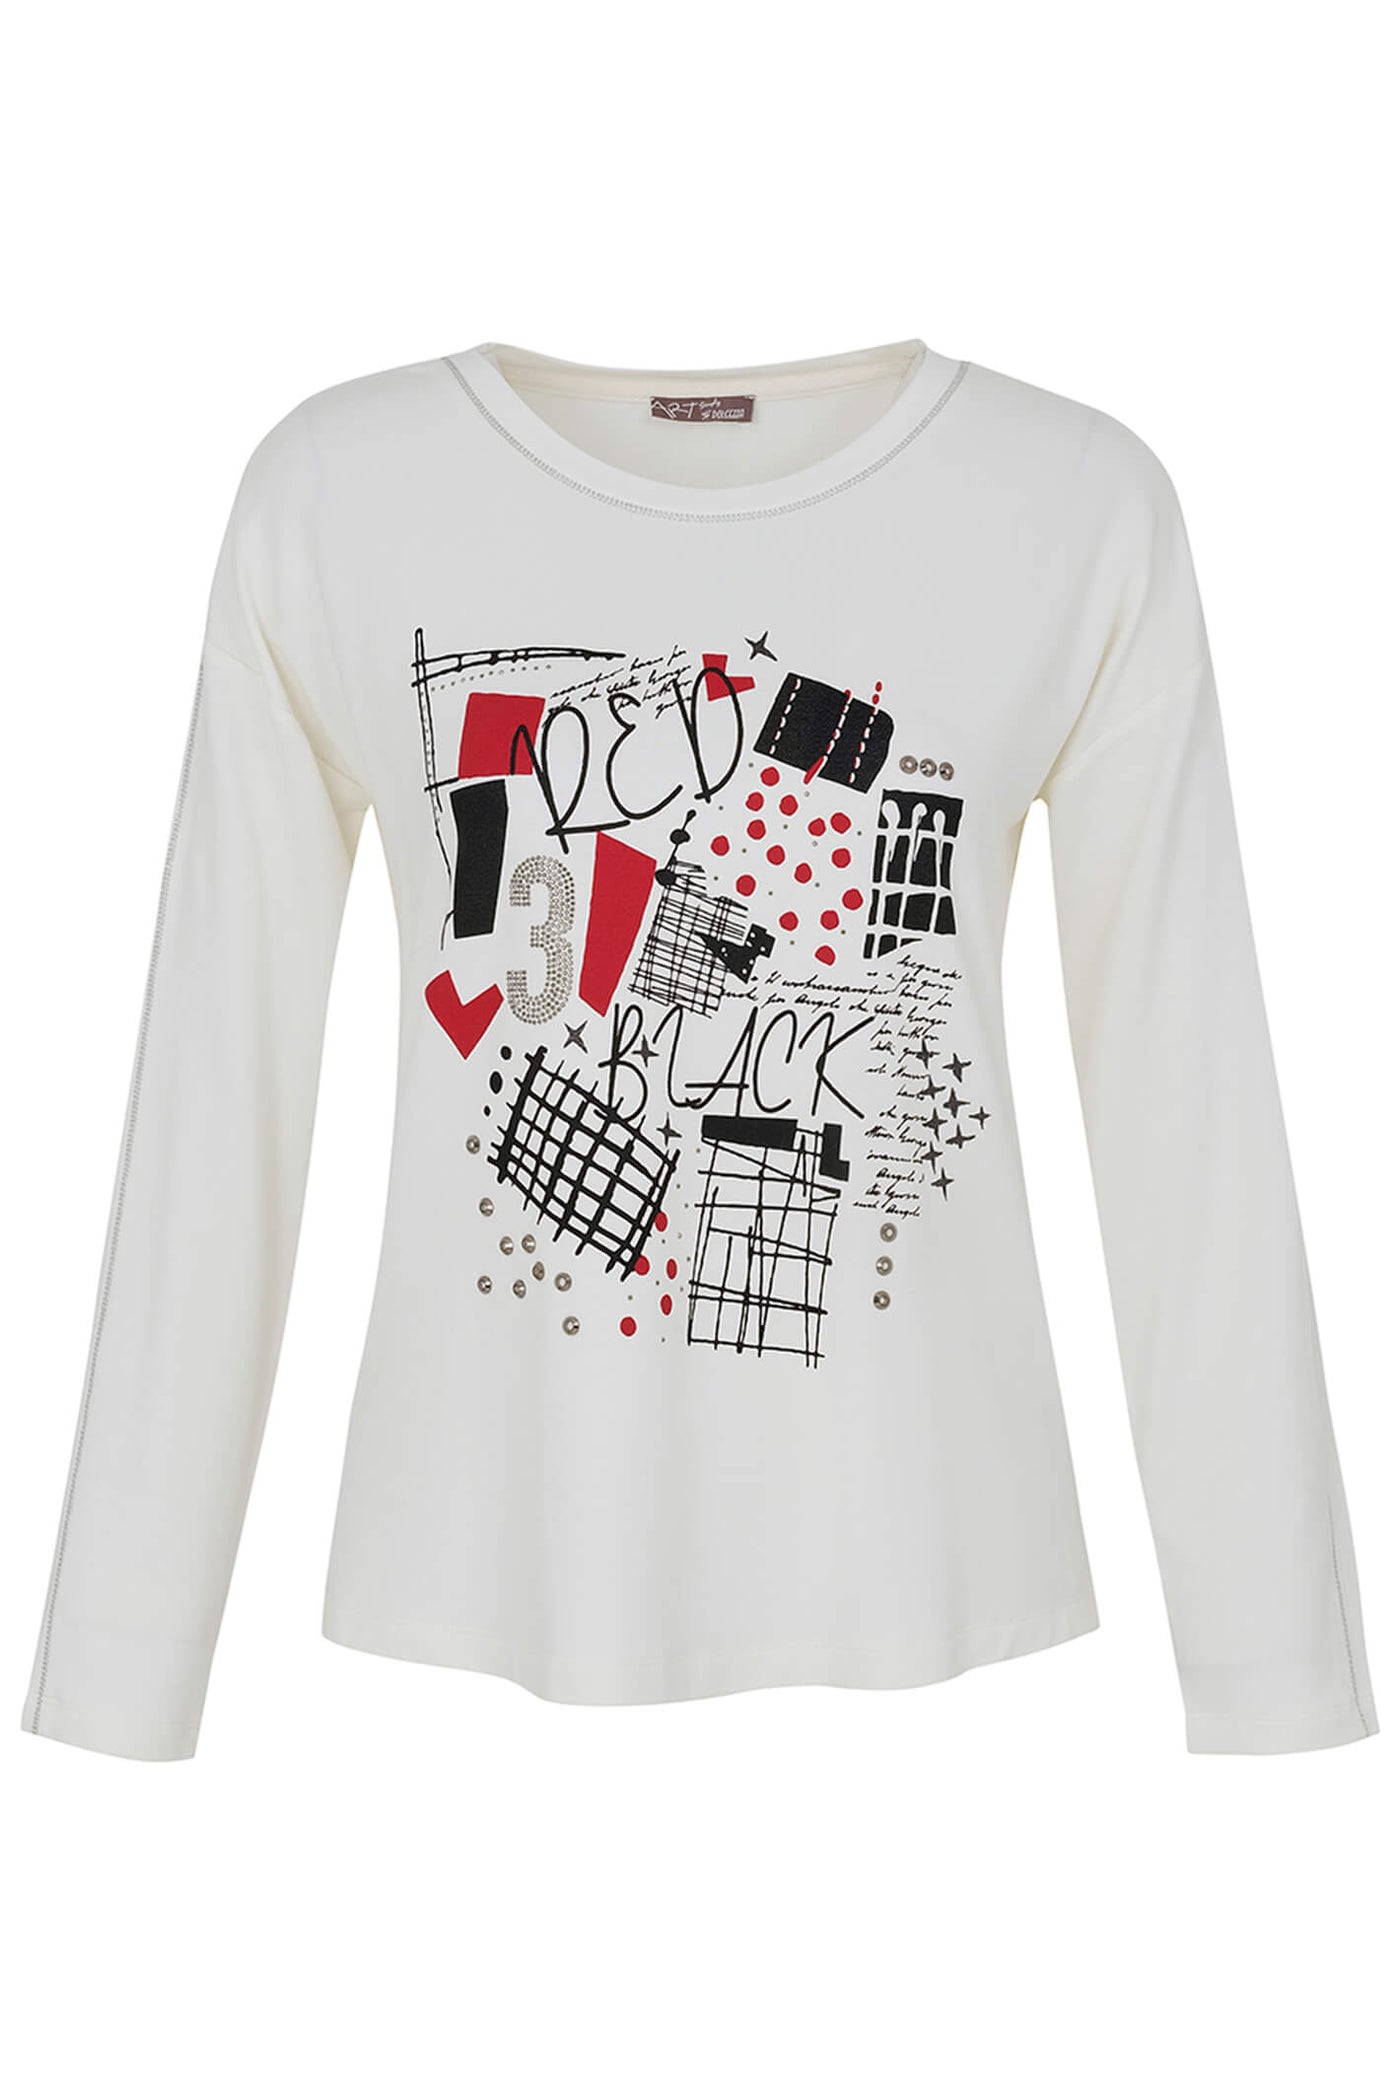 Dolcezza 73604 White Tear Down The Wall Print Long Sleeve Top - Rouge Boutique